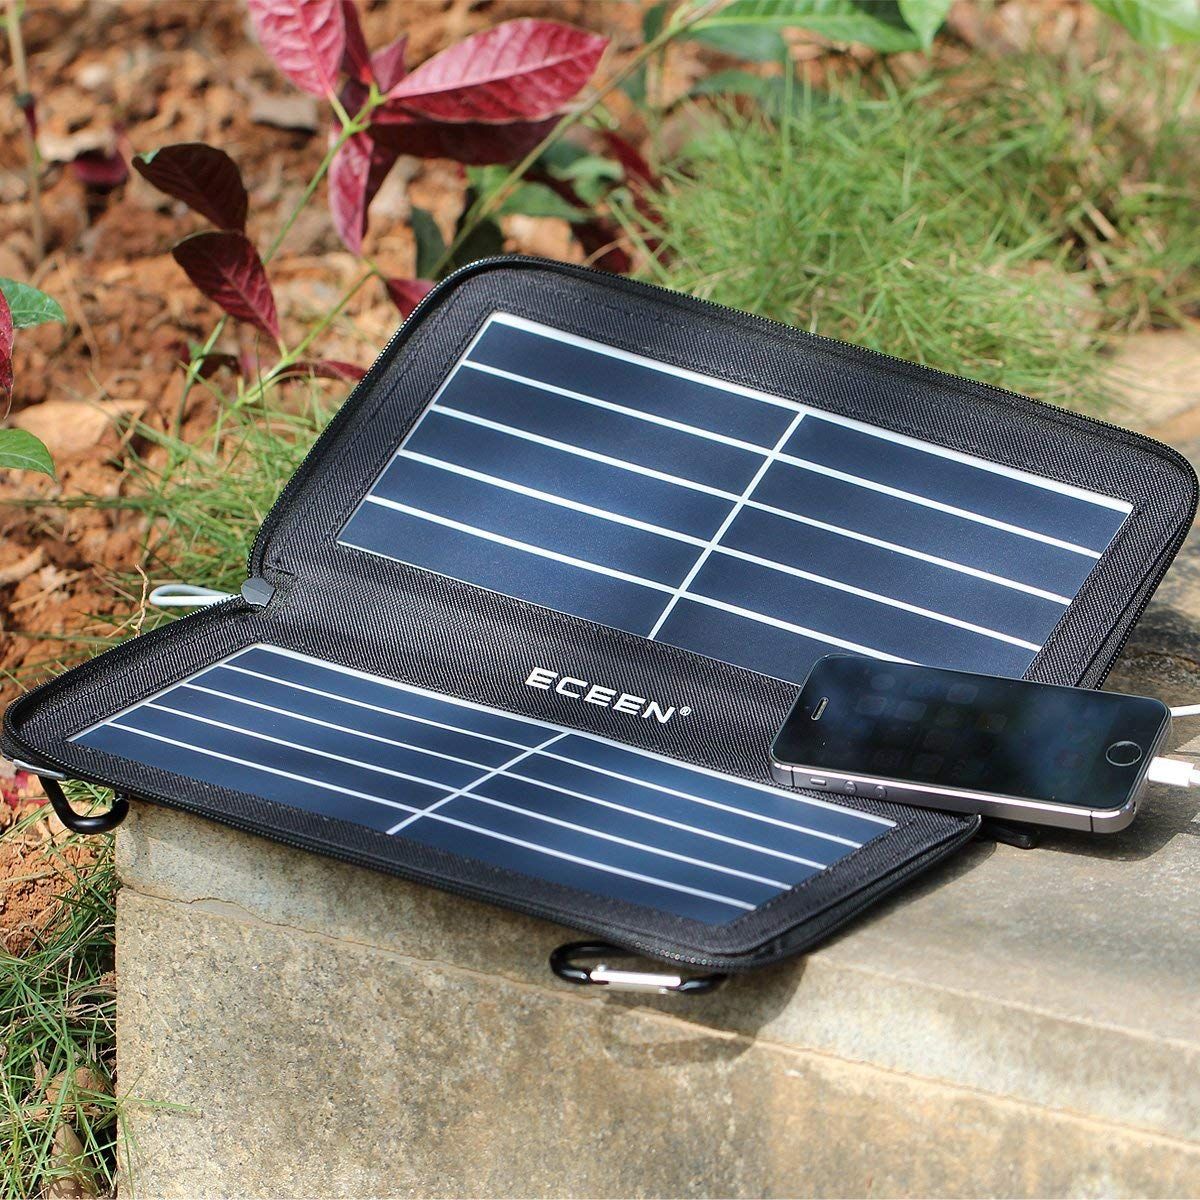 ECEEN Folding Solar Panel Phone Charger With USB PortZipper Pack for ...